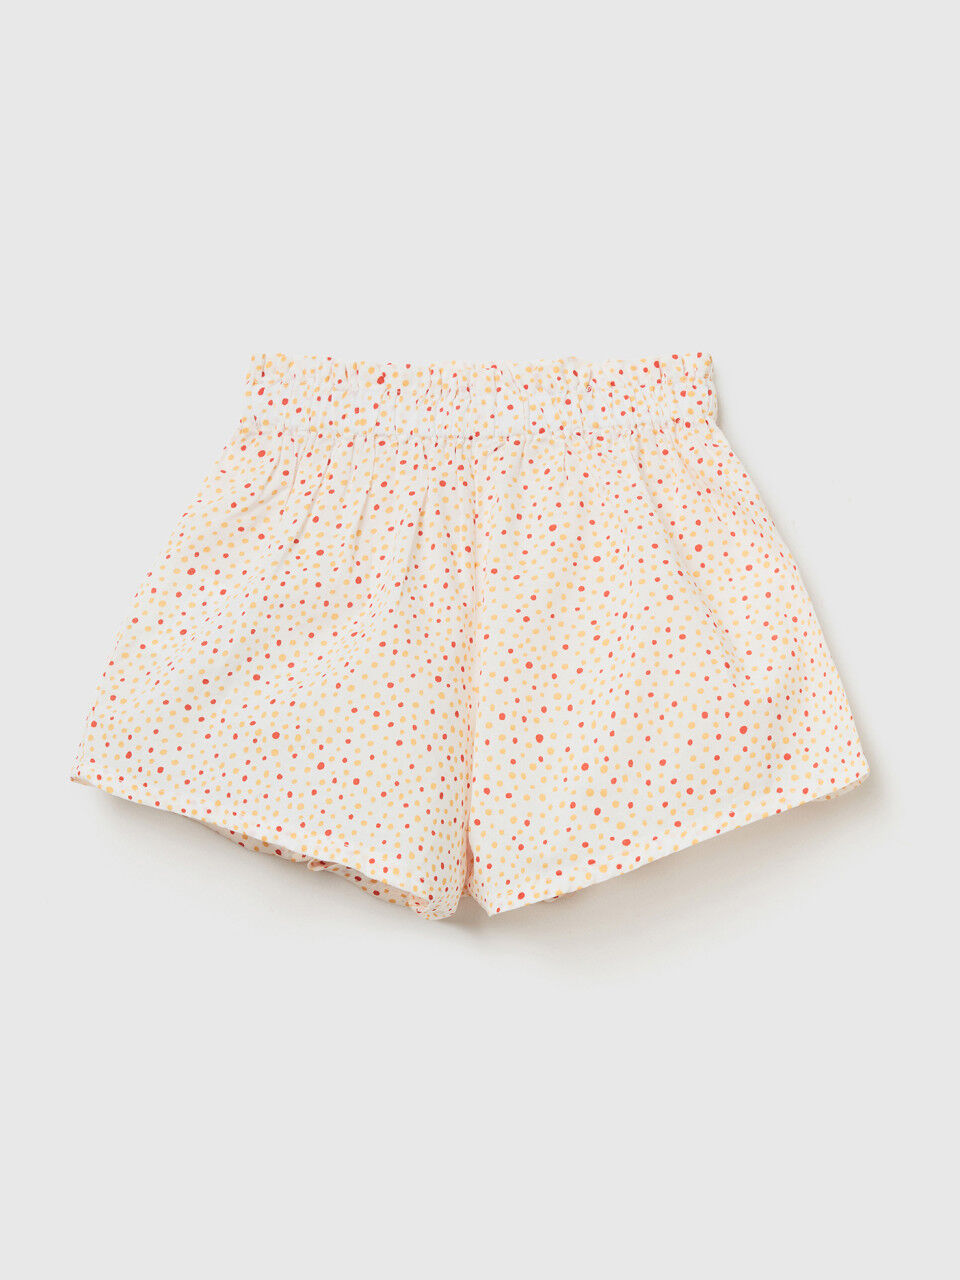 Micro patterned shorts